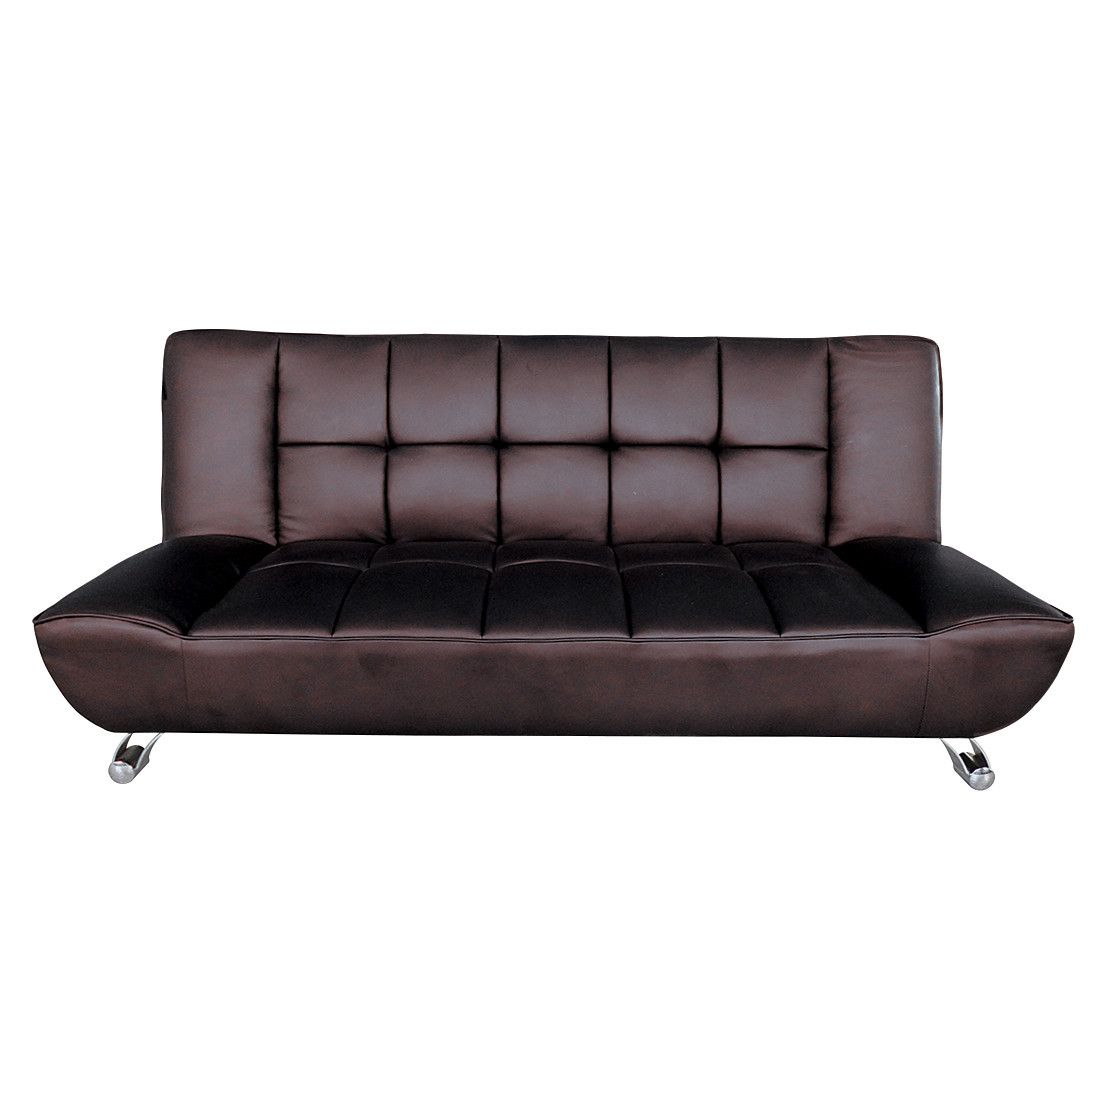 Vogue Sofa Bed Brown Faux Leather – Sofa Beds – Living Room Seating For Faux Leather Sofas In Dark Brown (View 14 of 20)